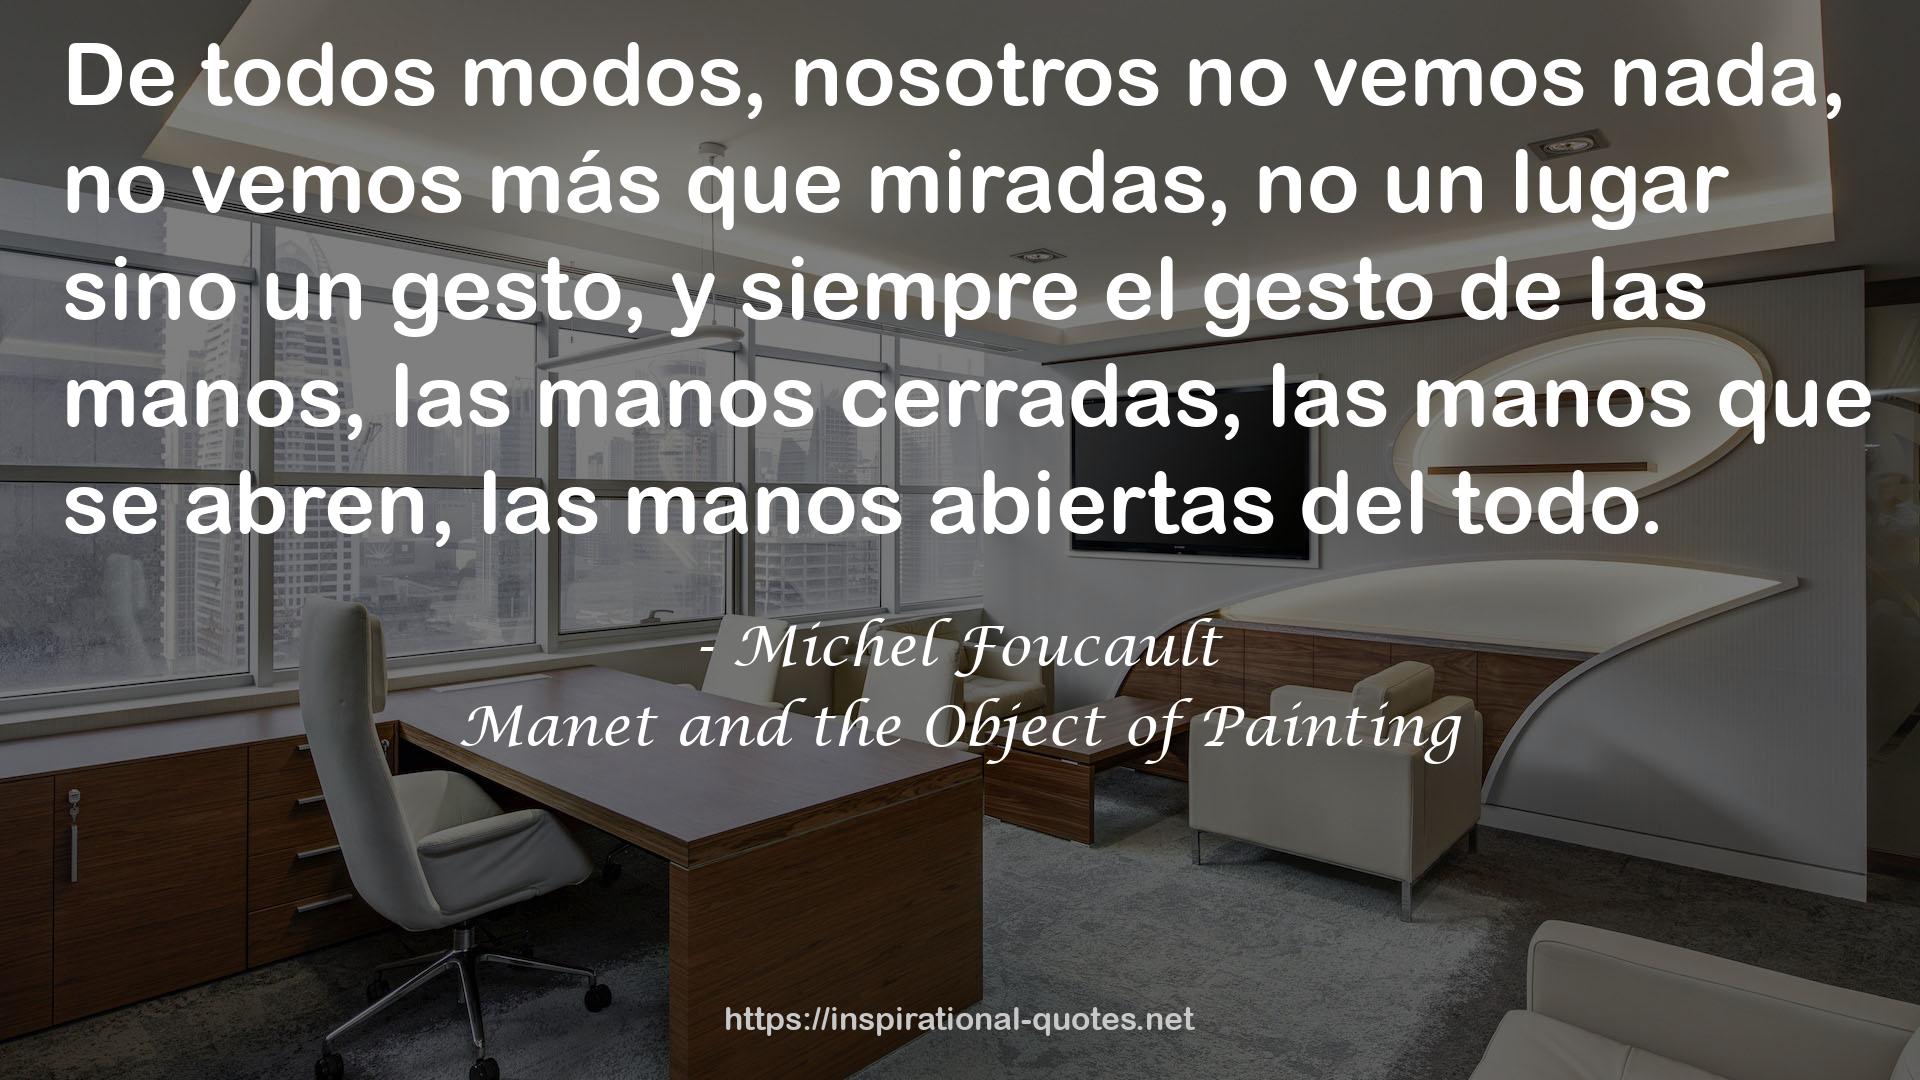 Manet and the Object of Painting QUOTES